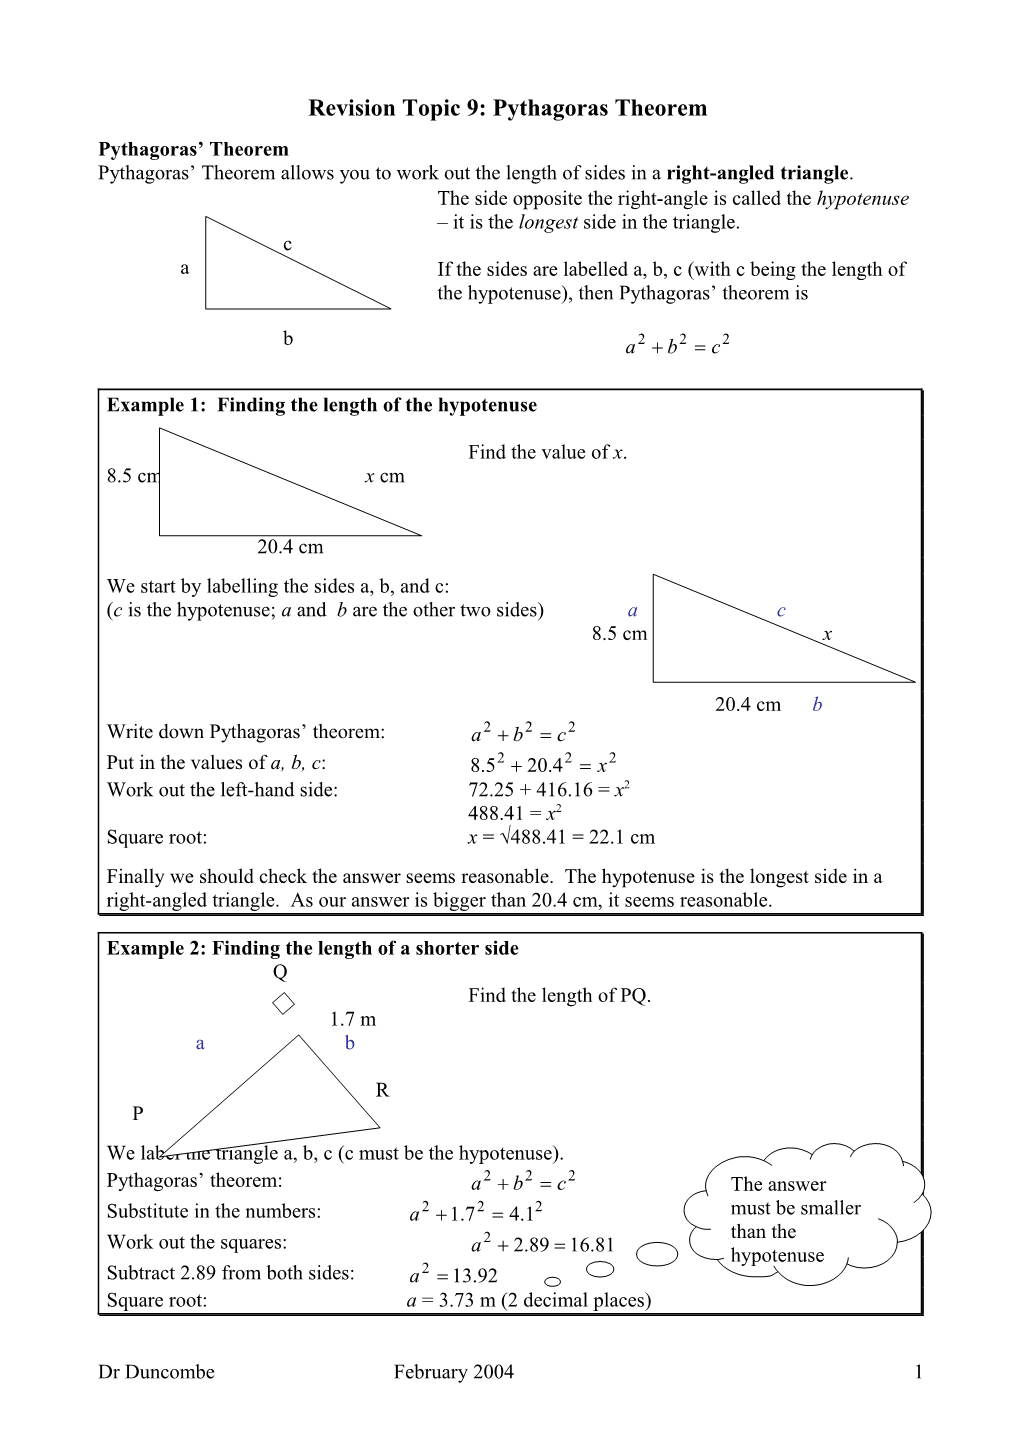 Revision Topic 6: Ratio s1